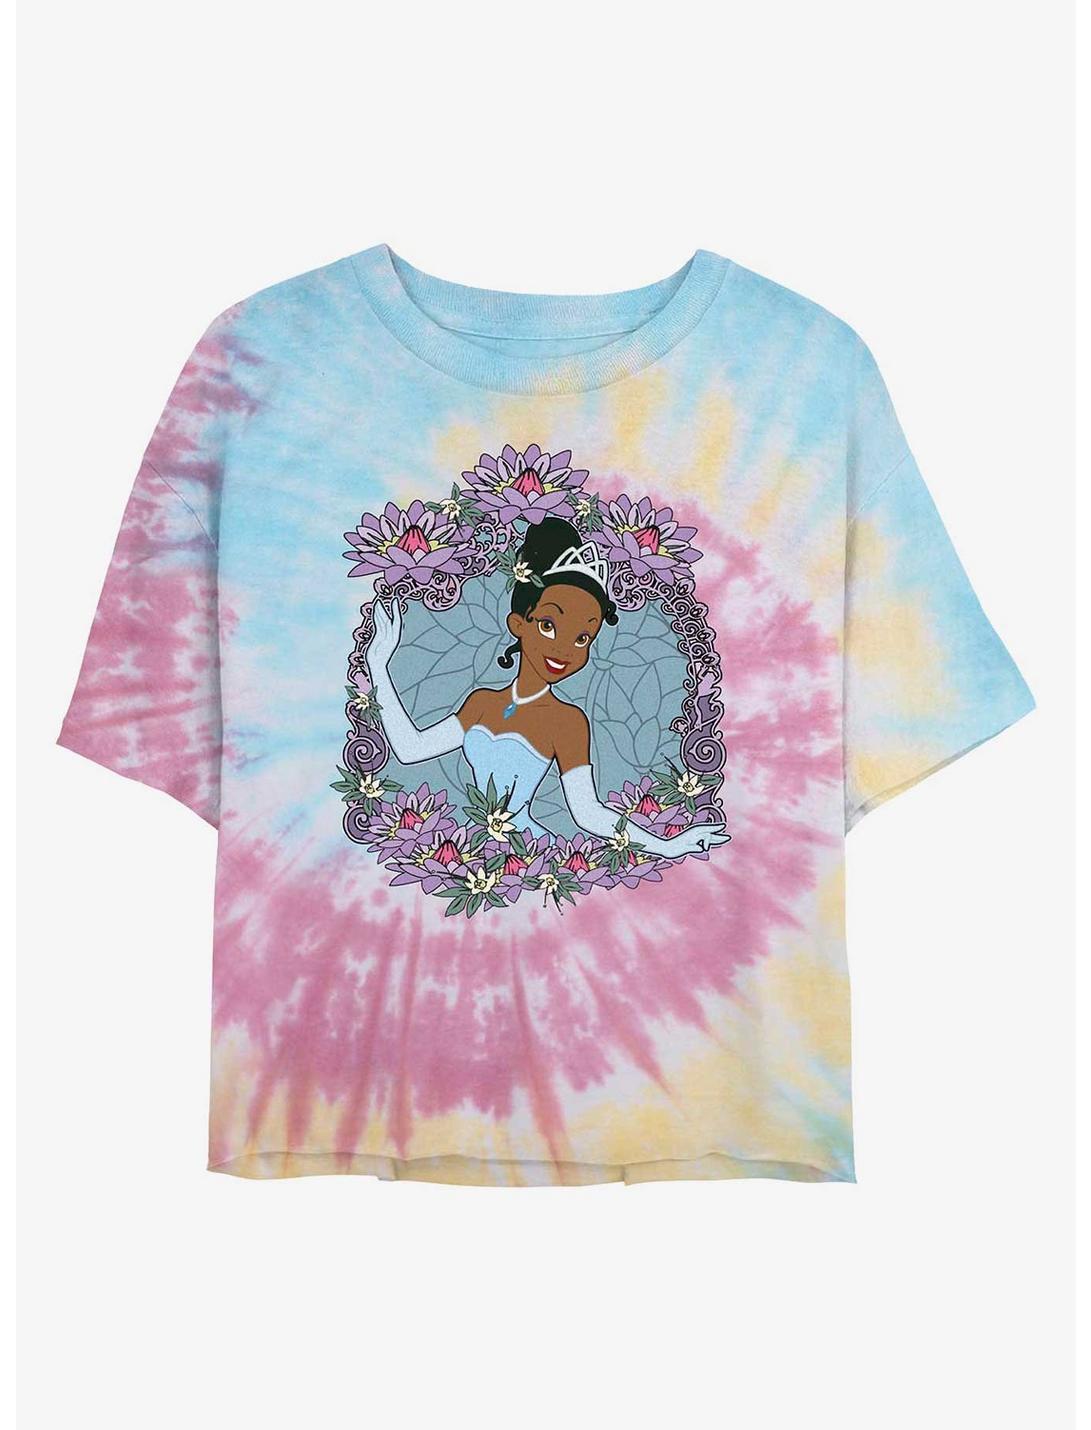 Disney The Princess and the Frog Tiana Love Tie Dye Crop Girls T-Shirt, BLUPNKLY, hi-res